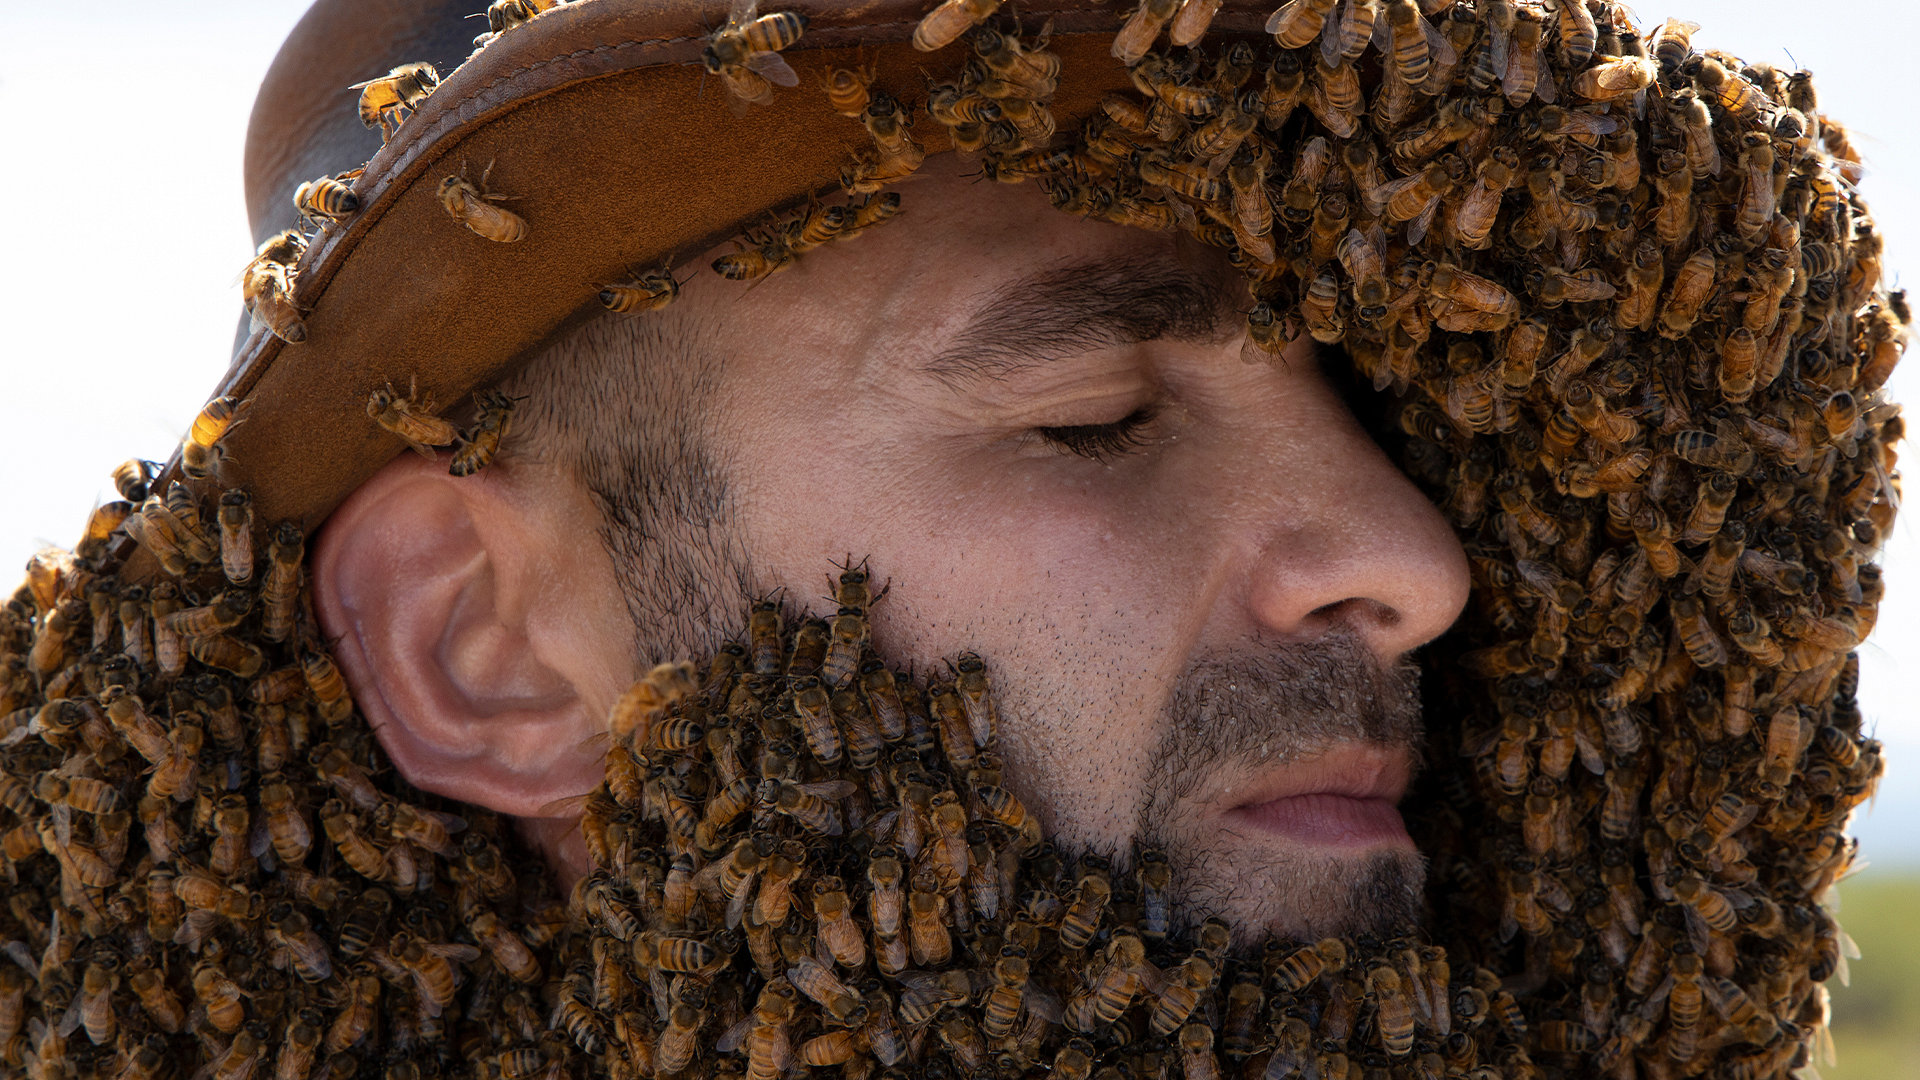 Swarmed By Killer Bees